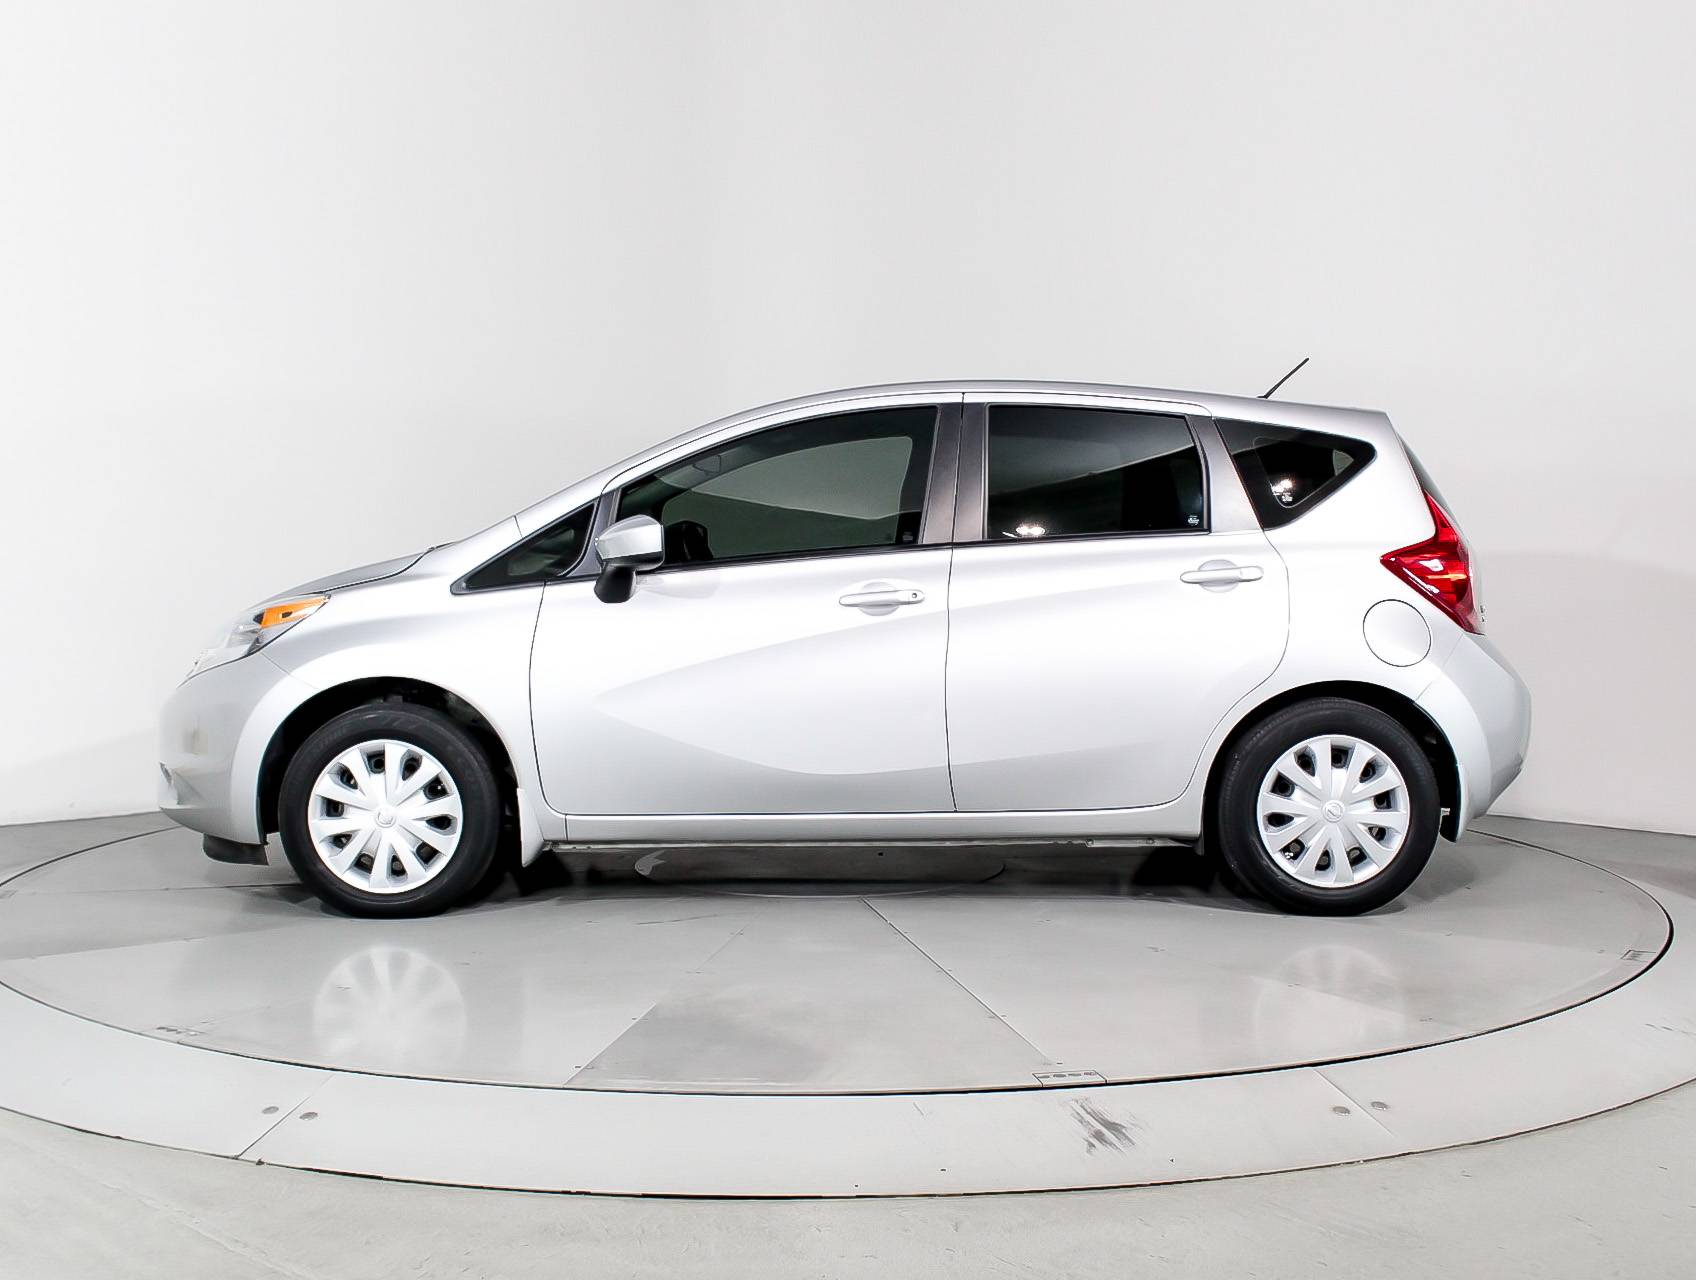 Used 2015 NISSAN VERSA NOTE Sv for sale in HOLLYWOOD | 94342